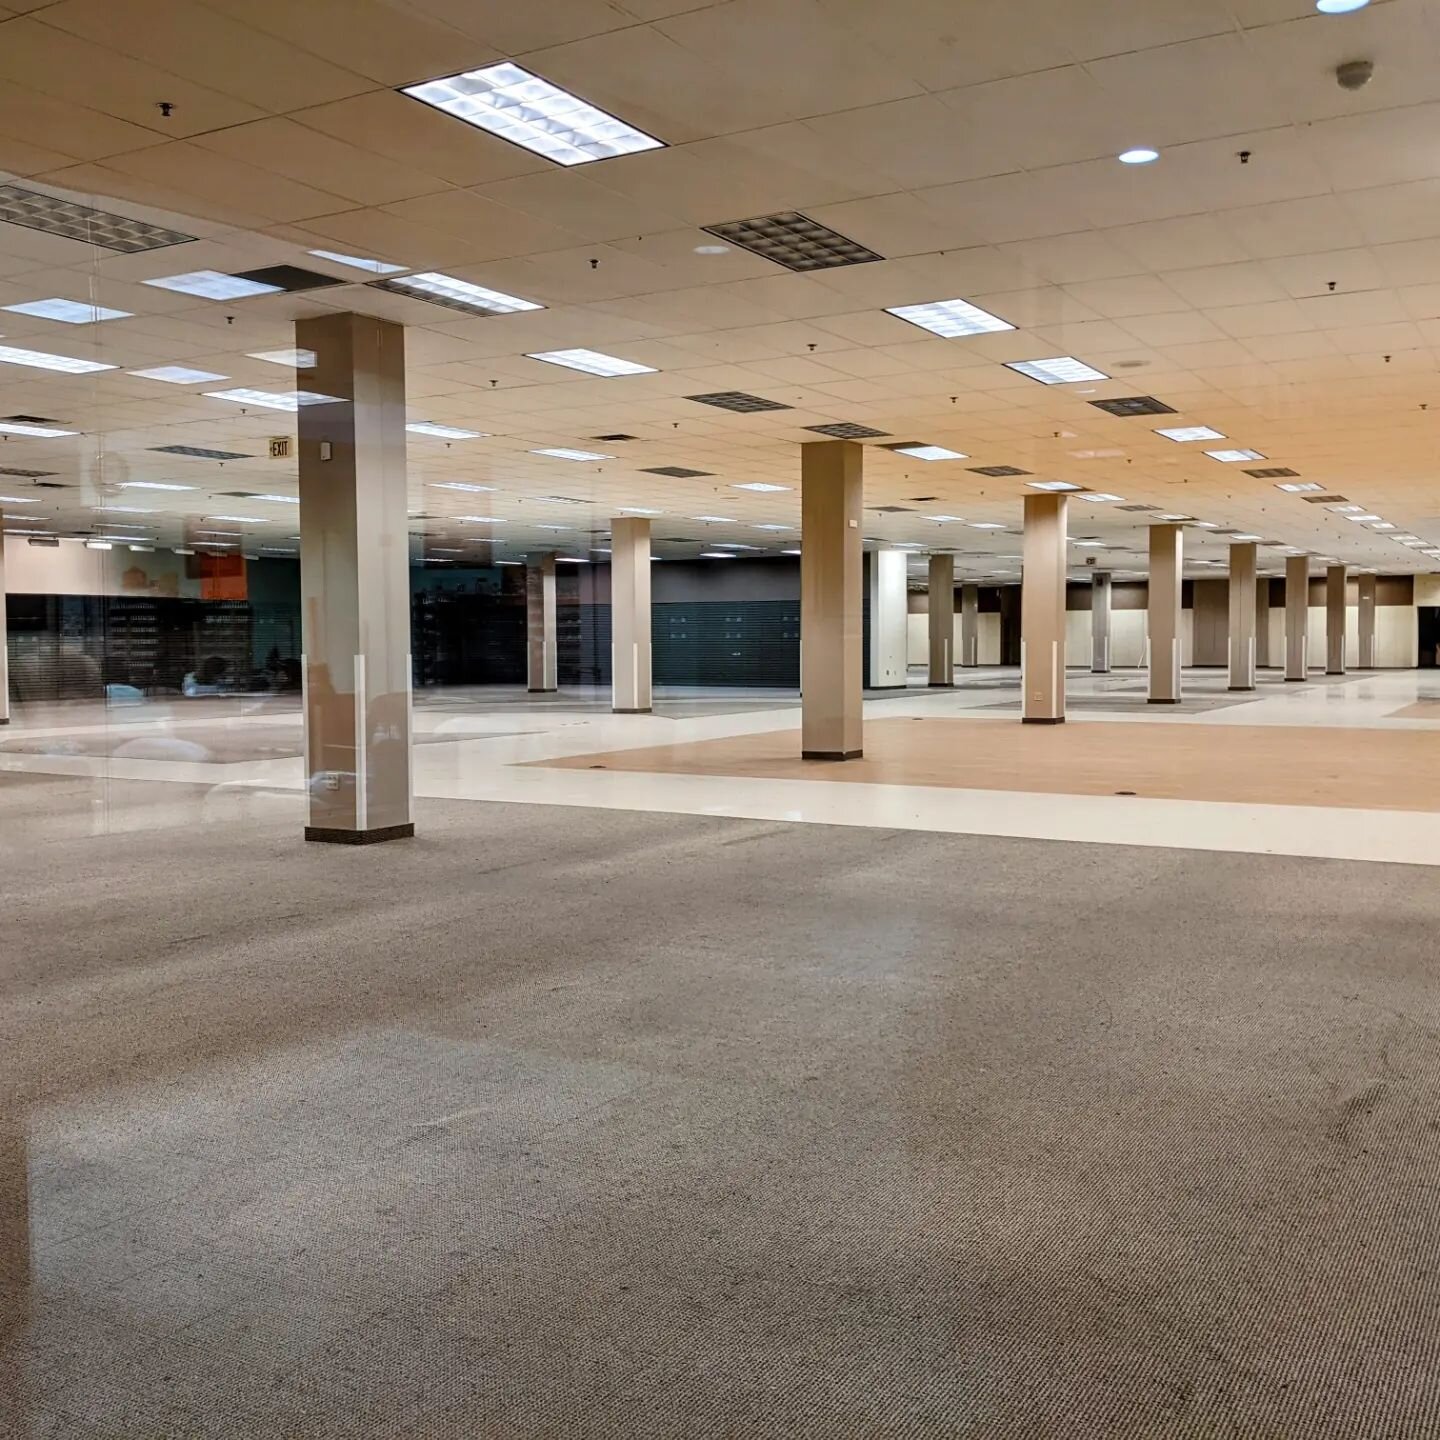 Yesterday I was at the South county center. It's interesting to see a mall that's in between states. It has enough people and stores to where it's definitely not dead but it's not thriving either. It's like smack right in the middle between West coun